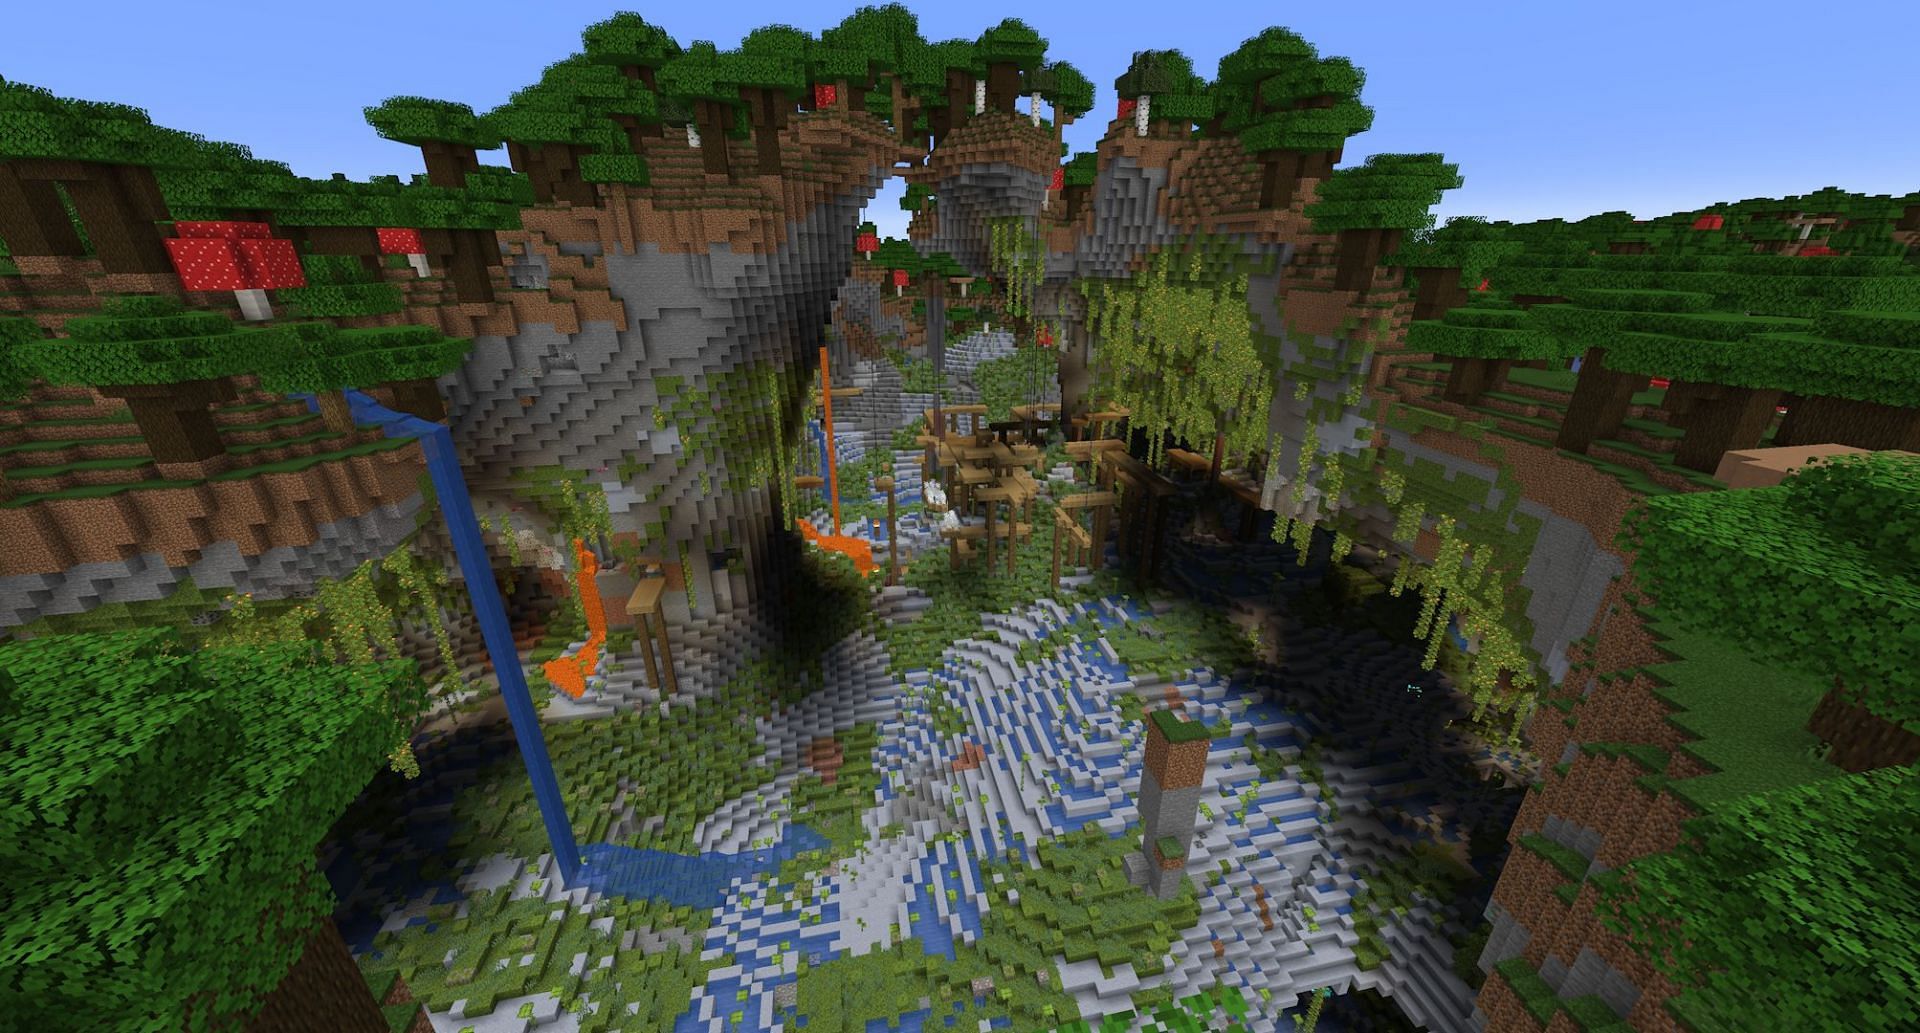 Surface caves can be a potential exception, but only during the day when it&#039;s safer. (Image via Mojang)